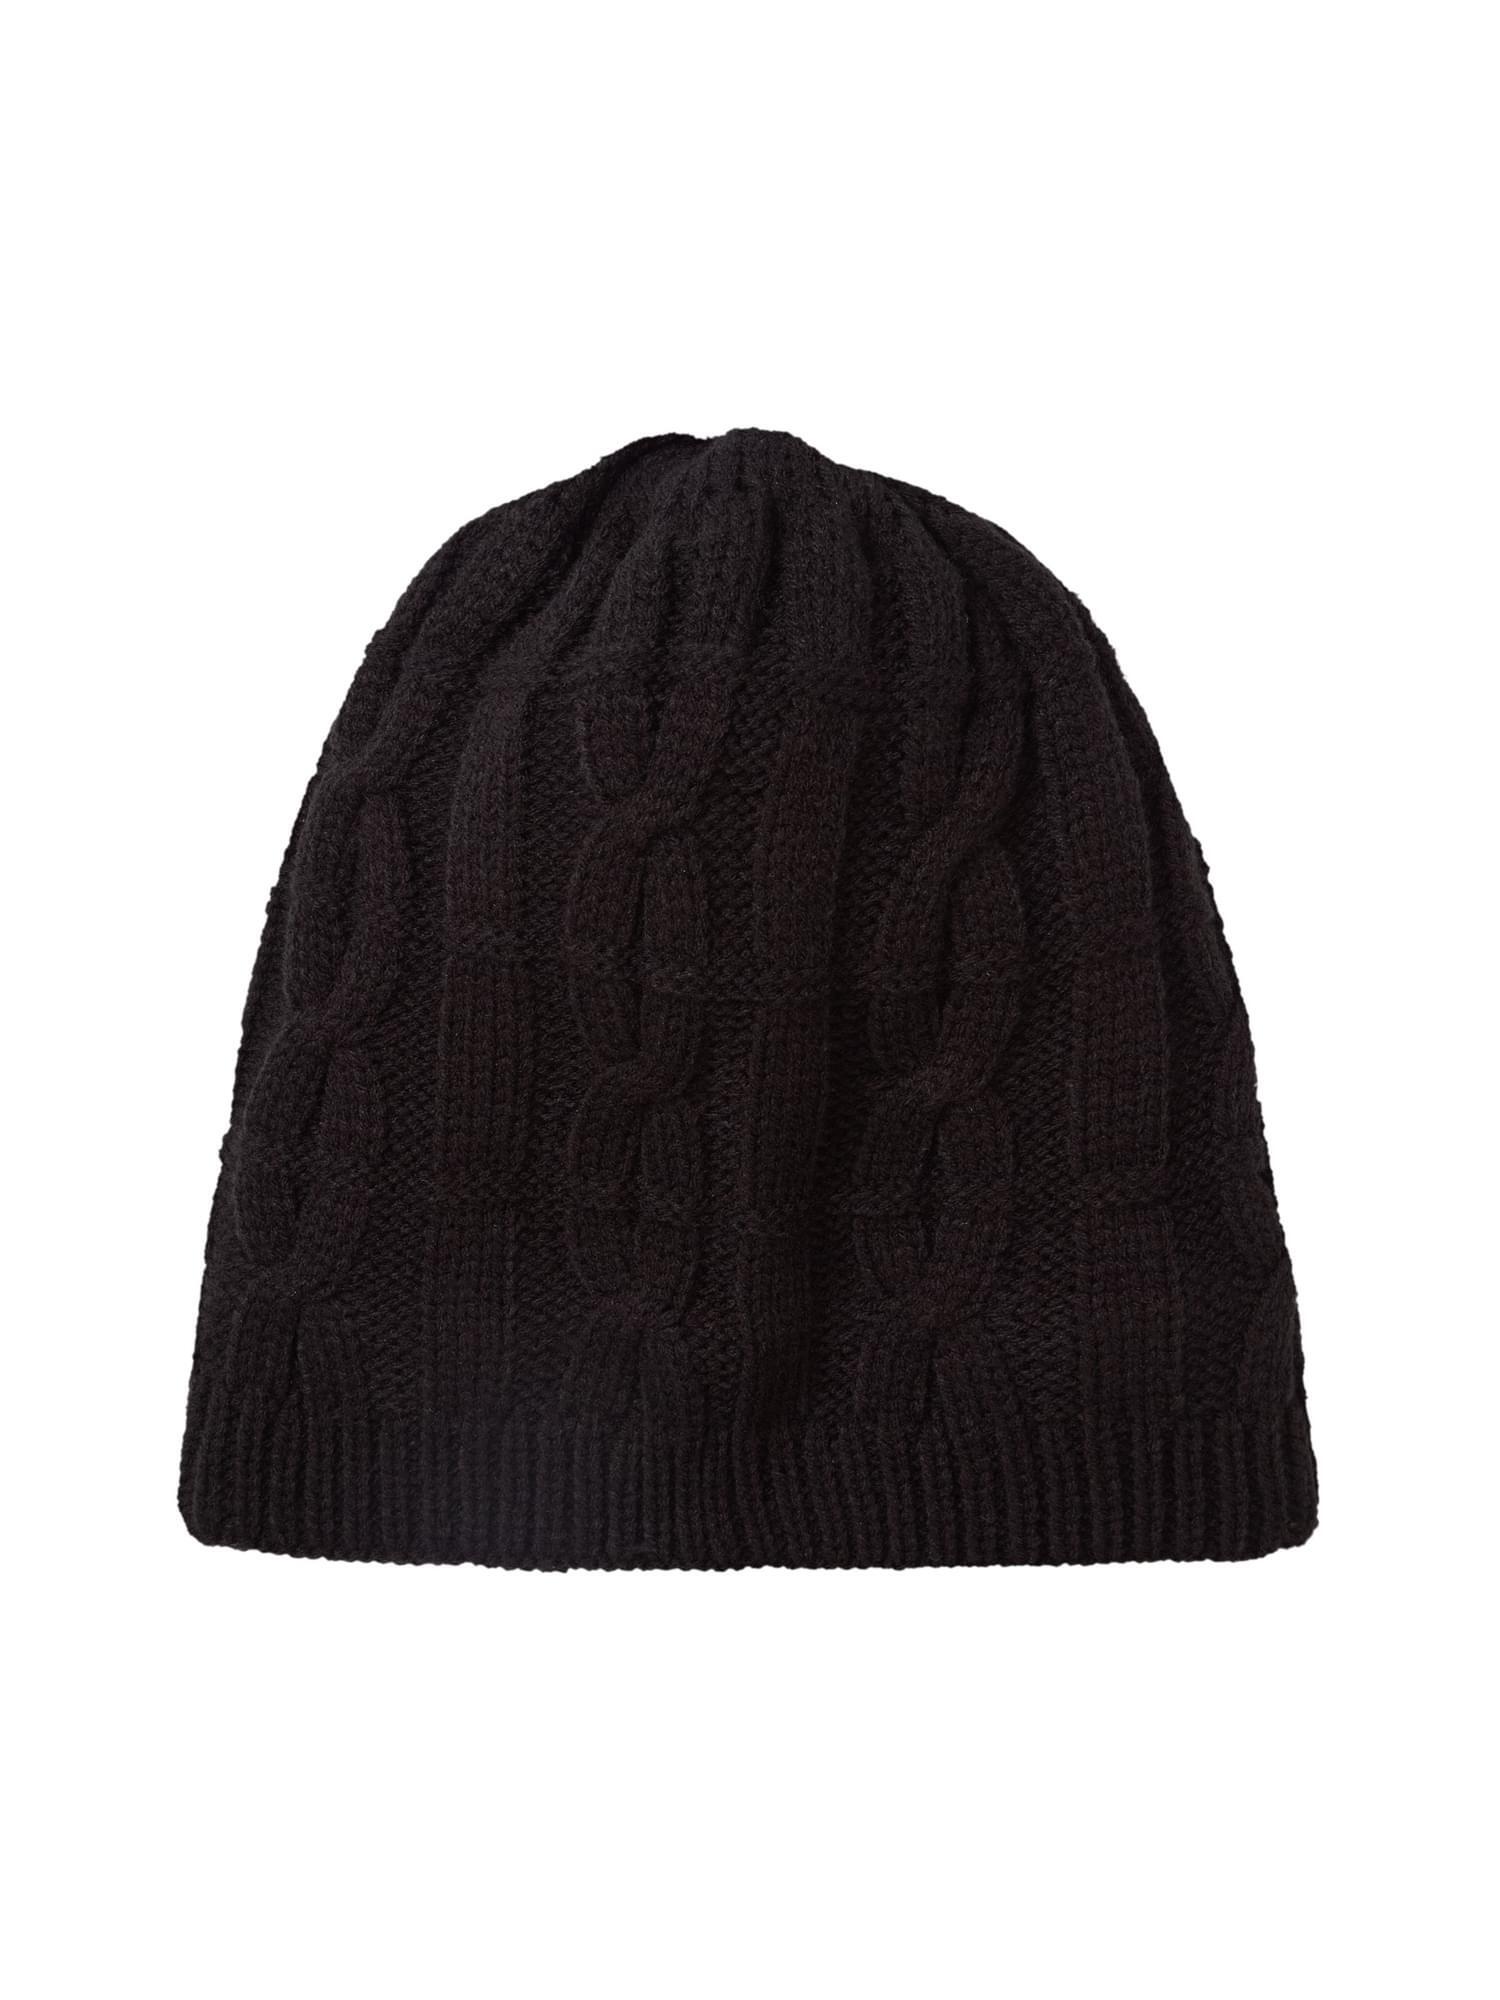 Waterproof Cold Weather Cable Knit Beanie Hat 2/3